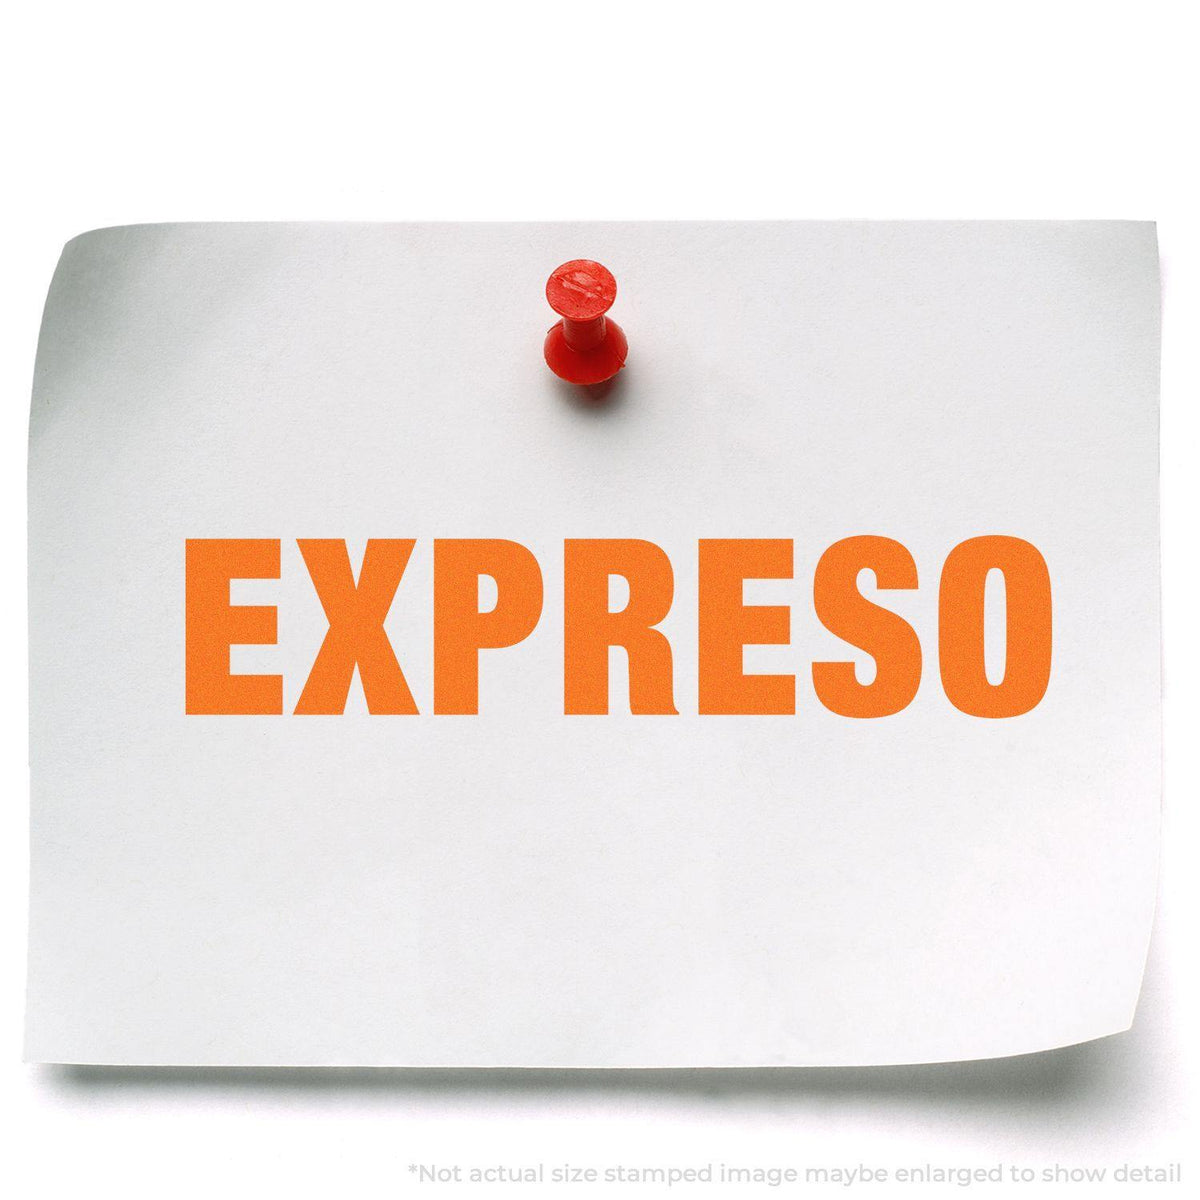 Expreso Rubber Stamp In Use Photo